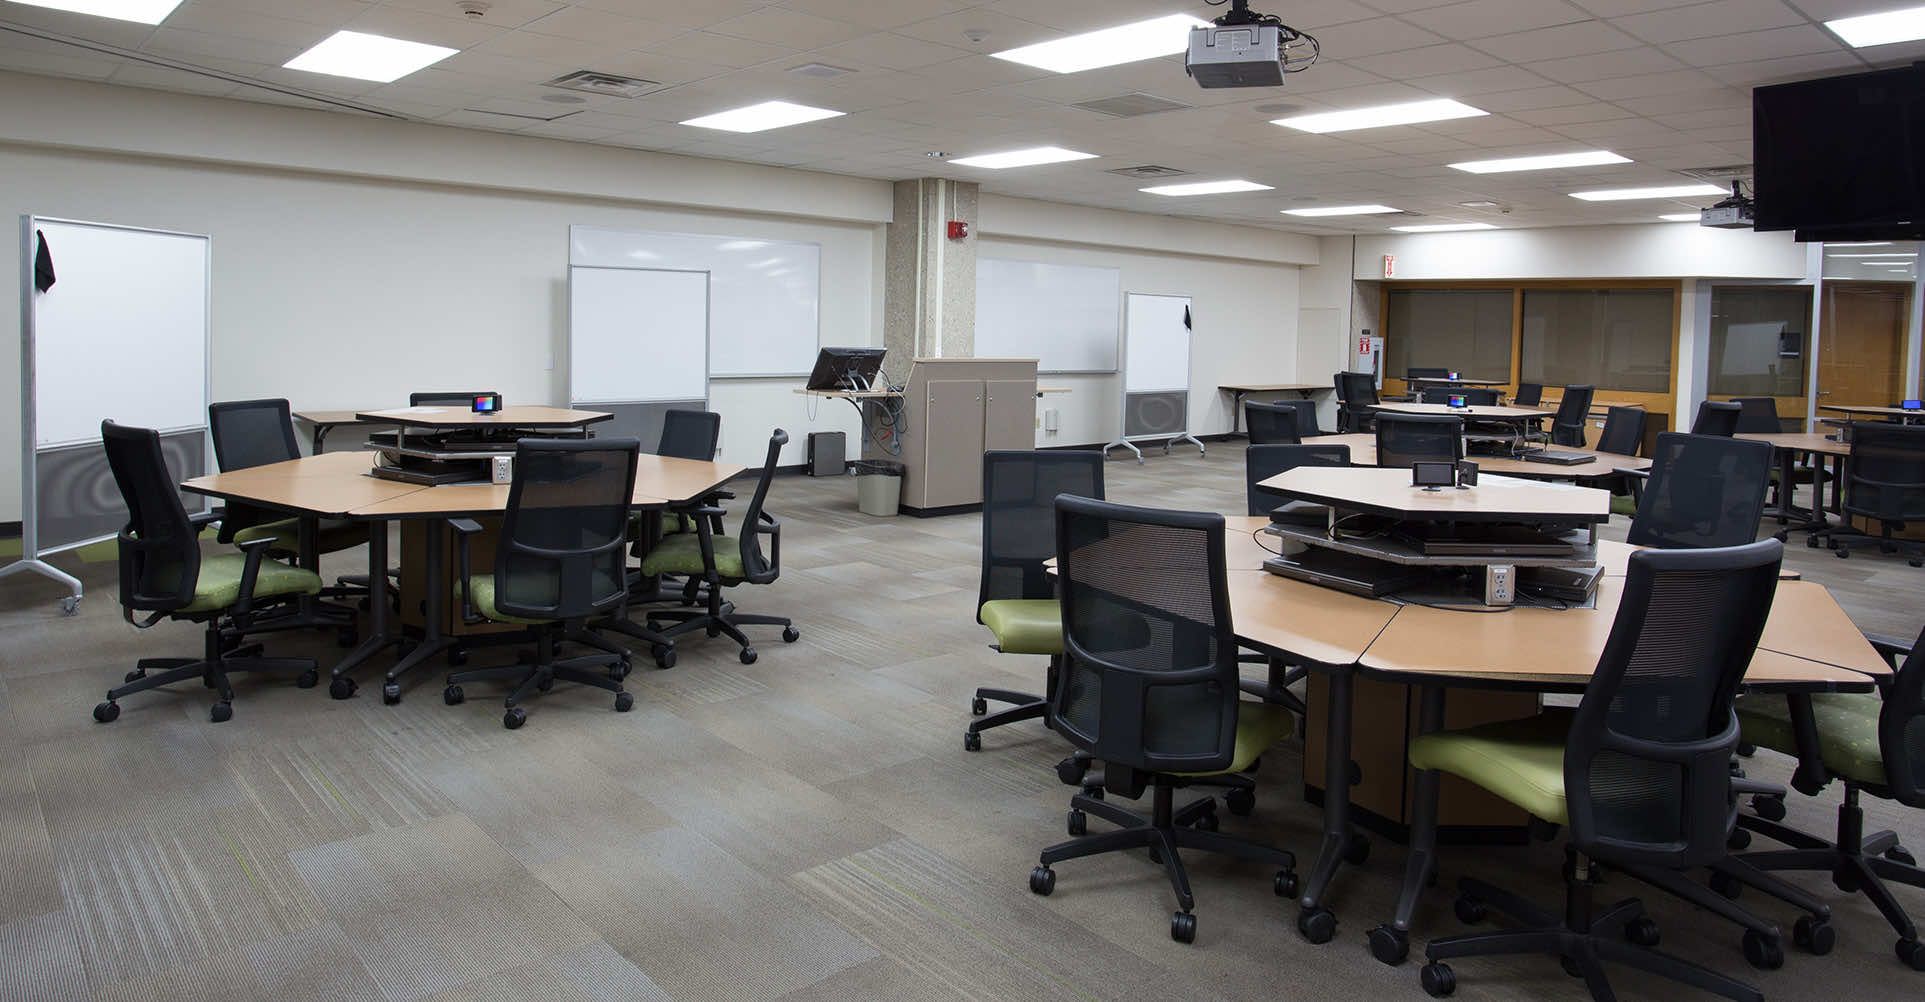 Library learning center with whiteboards, desks and chairs